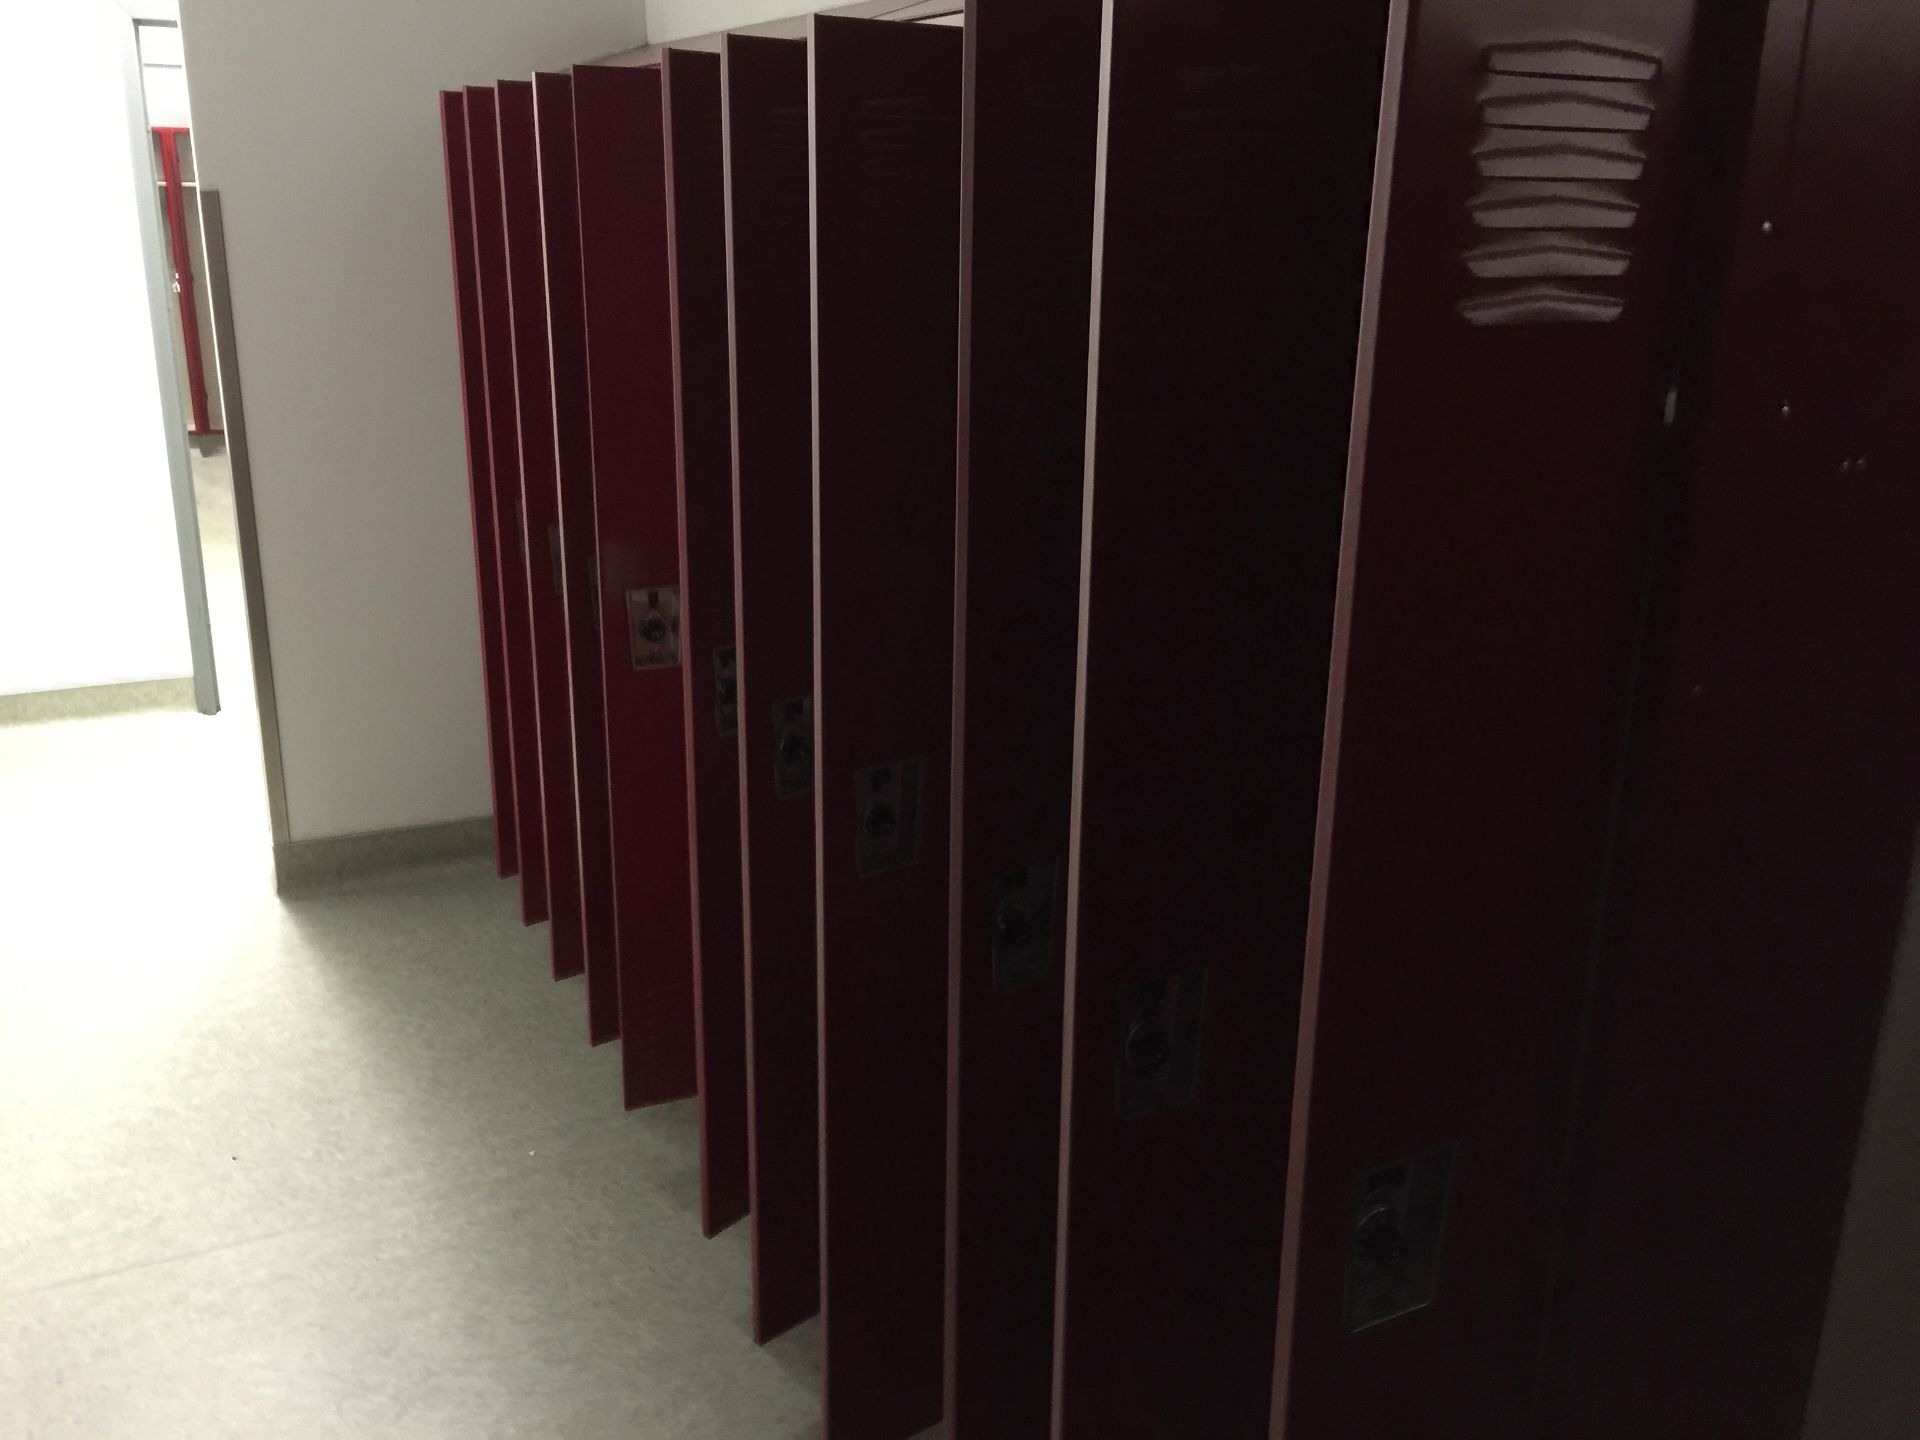 (201) men and women's lockers, Room 4521. Located in Marion, Ohio Rigging Fee: $600 - Image 5 of 12